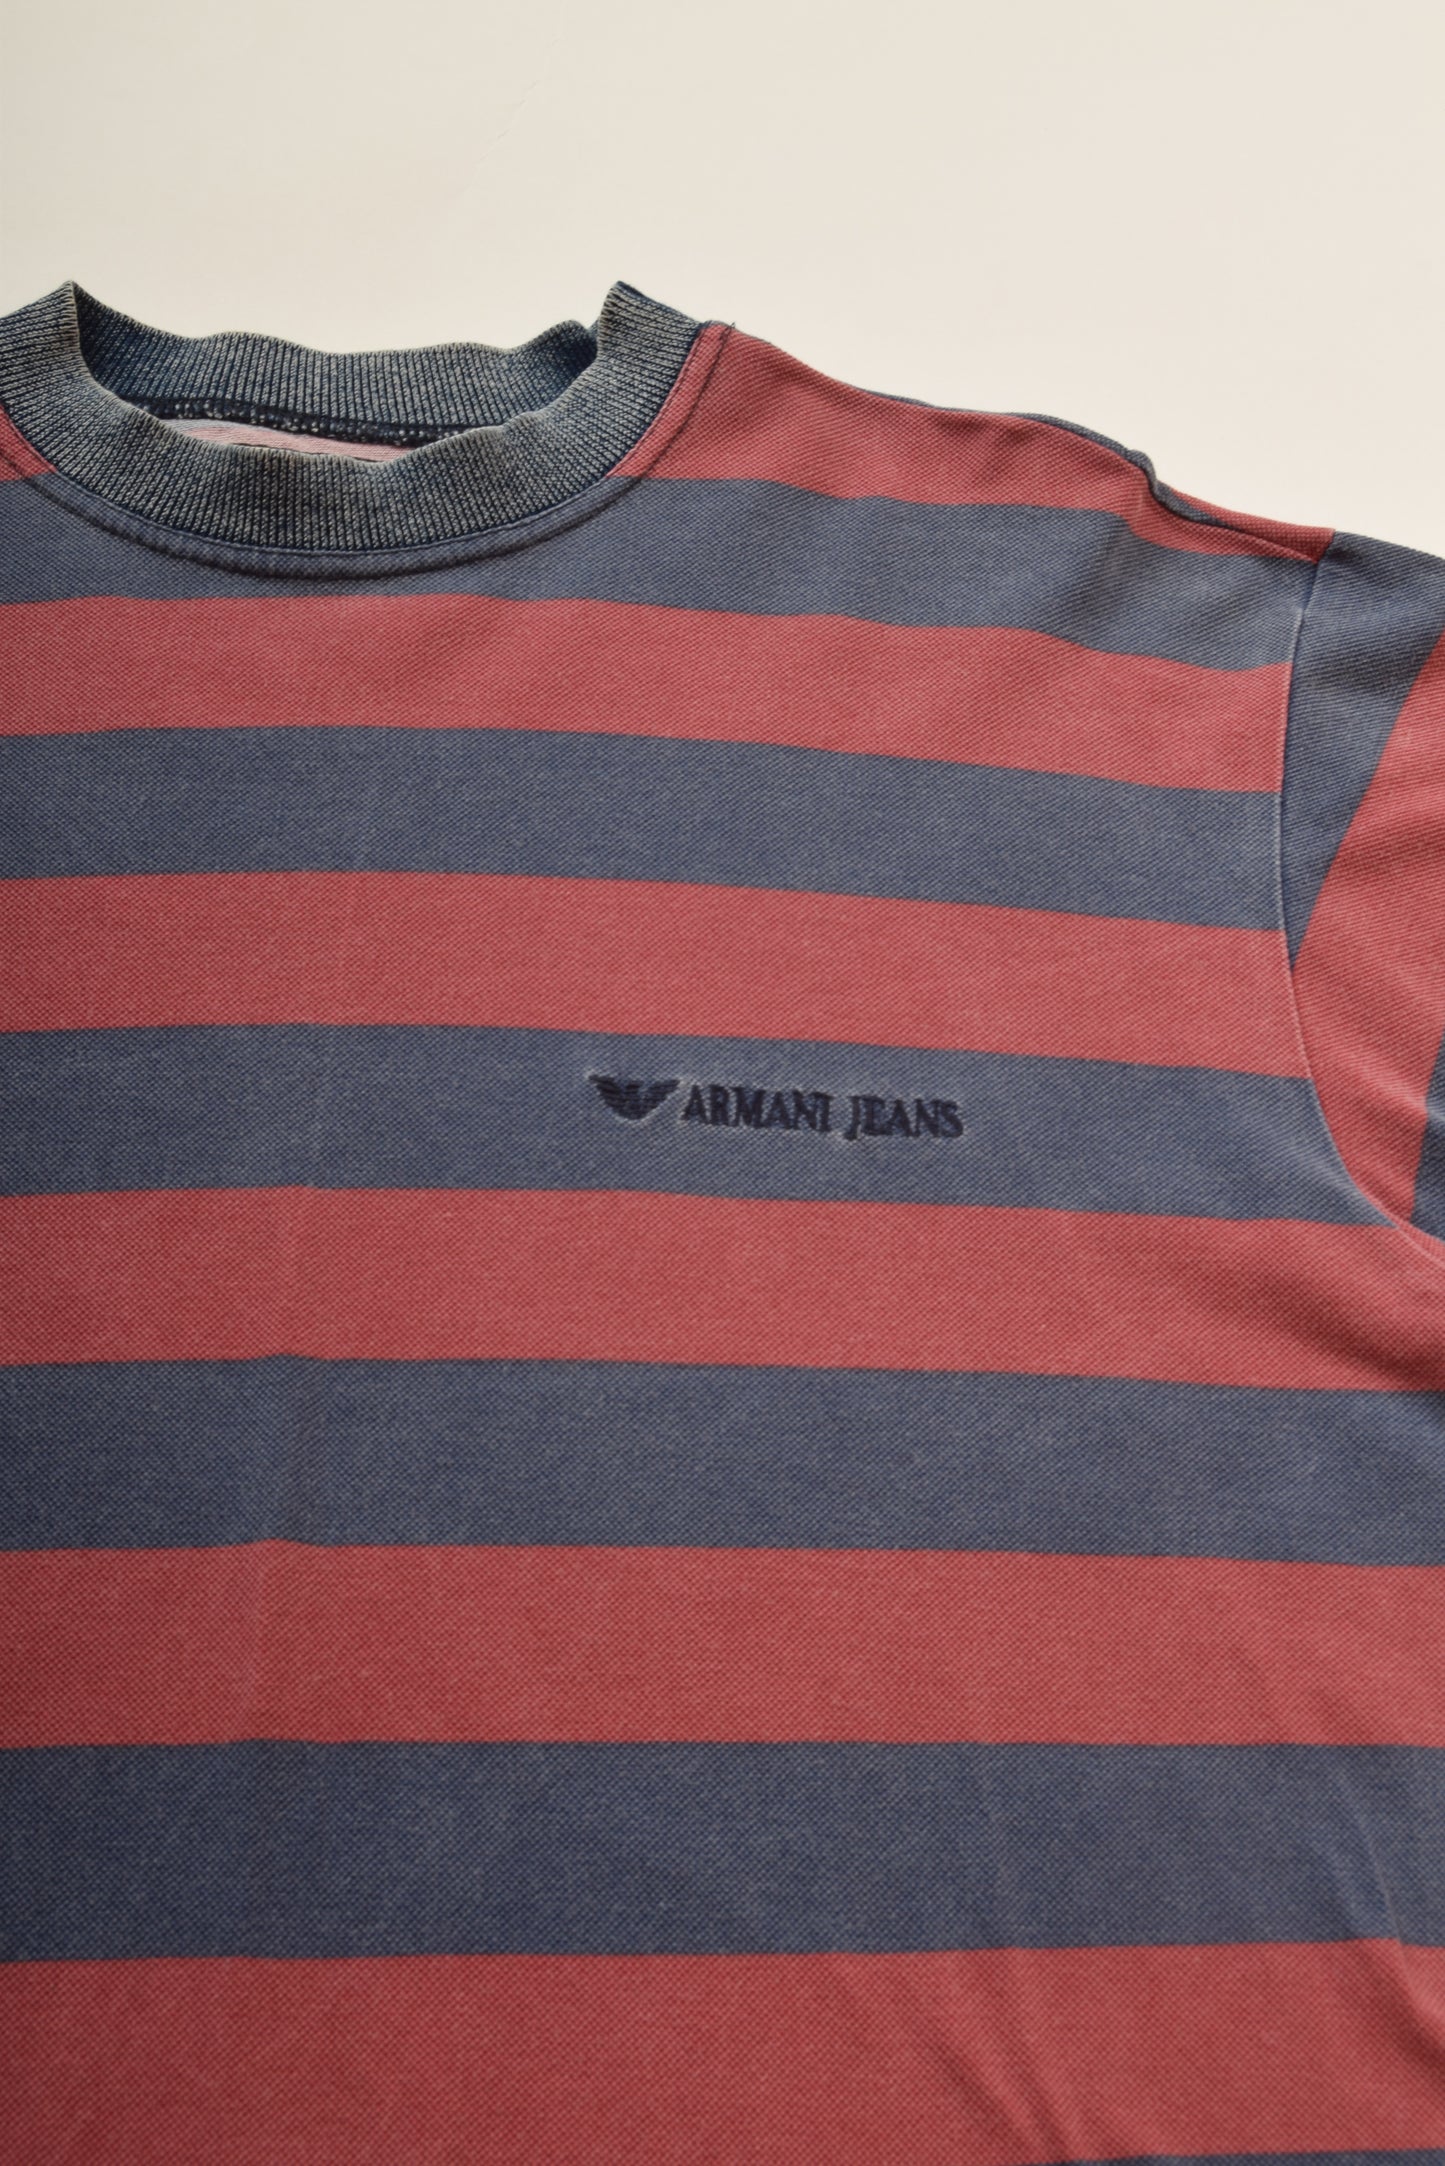 Vintage 90's Armani Jeans T-Shirt With Stripes Made in Italy